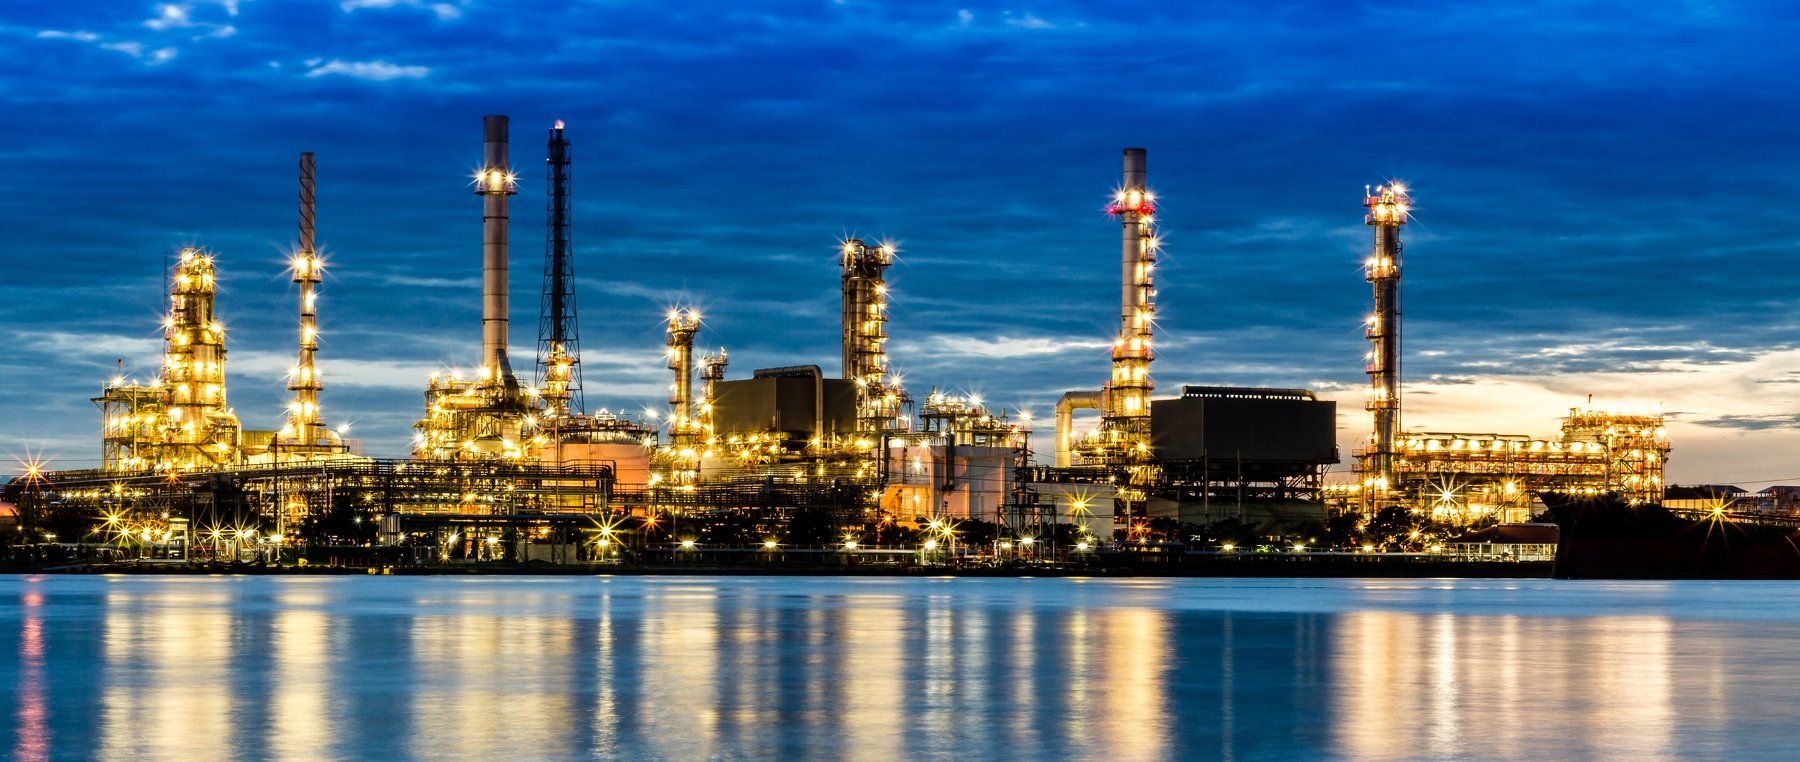  blue, chemical, chemistry, chimney, construction, energy, engineer, engineering, environment, equipment, factory, fuel, gas, gas-refinery, gasoline, global, heavy, industrial, industrial-plant, industry, light, manufacturing, metal, night, oil, petrochem, Sasin Tipchai